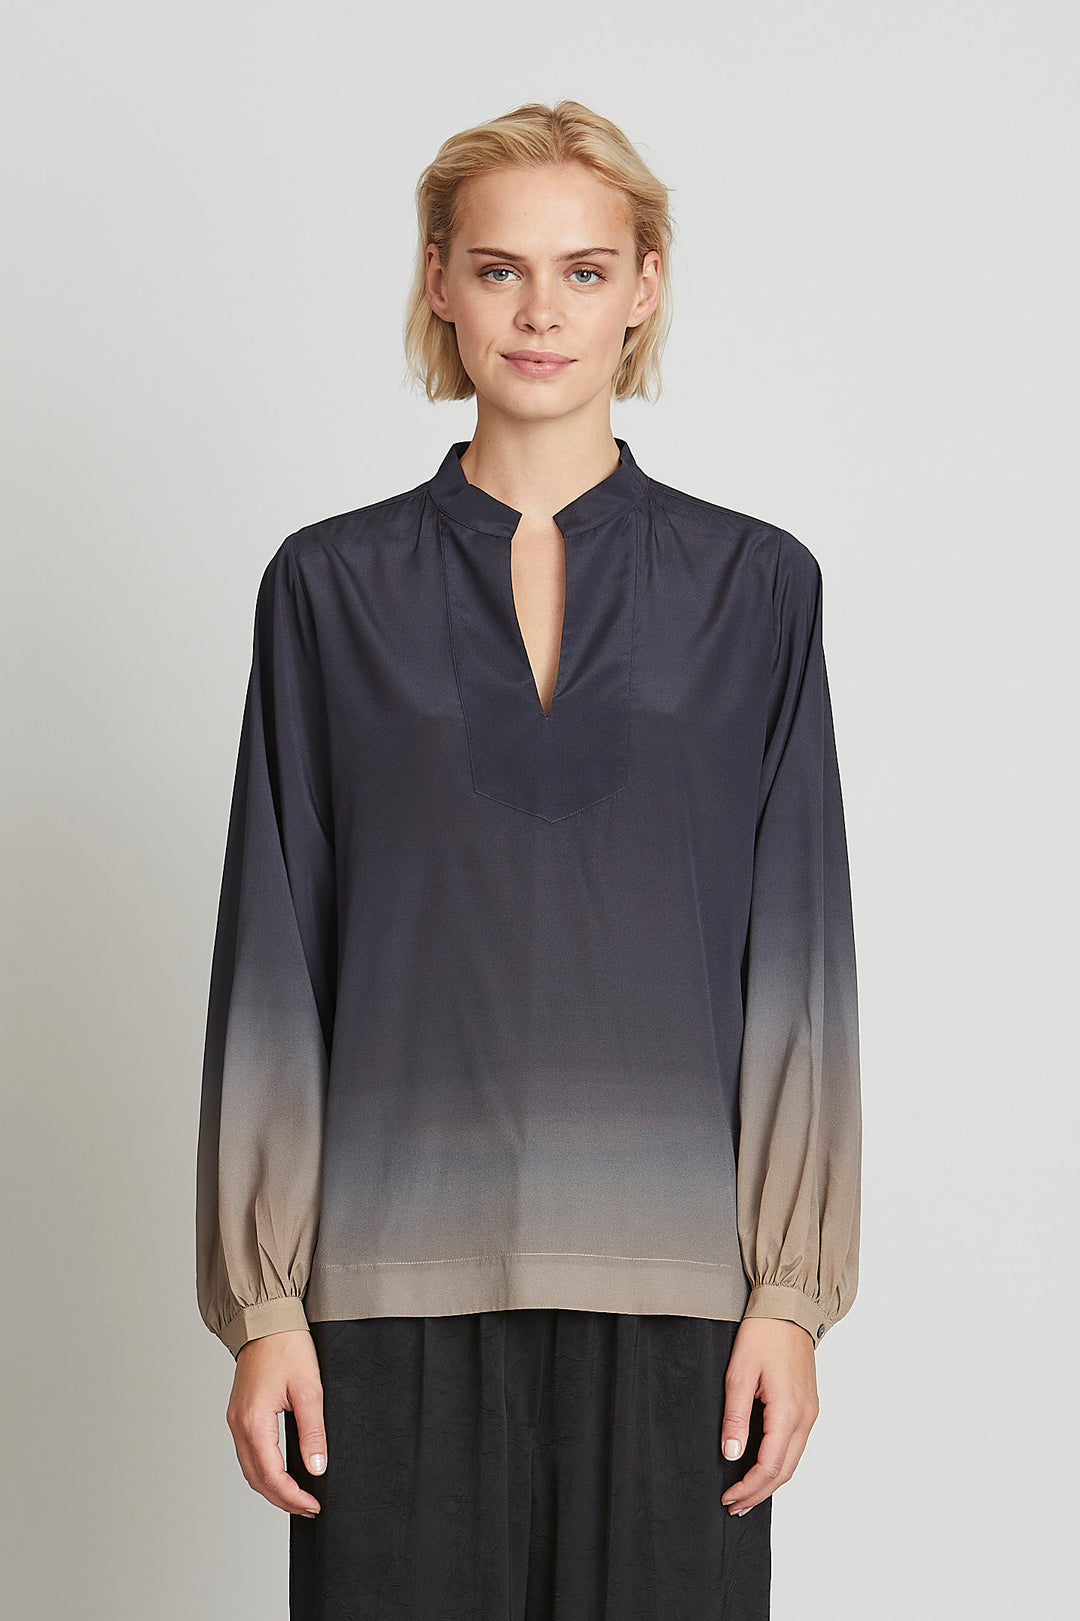 Heartmade Gaby blouse HM BLOUSE 185 Soft tint